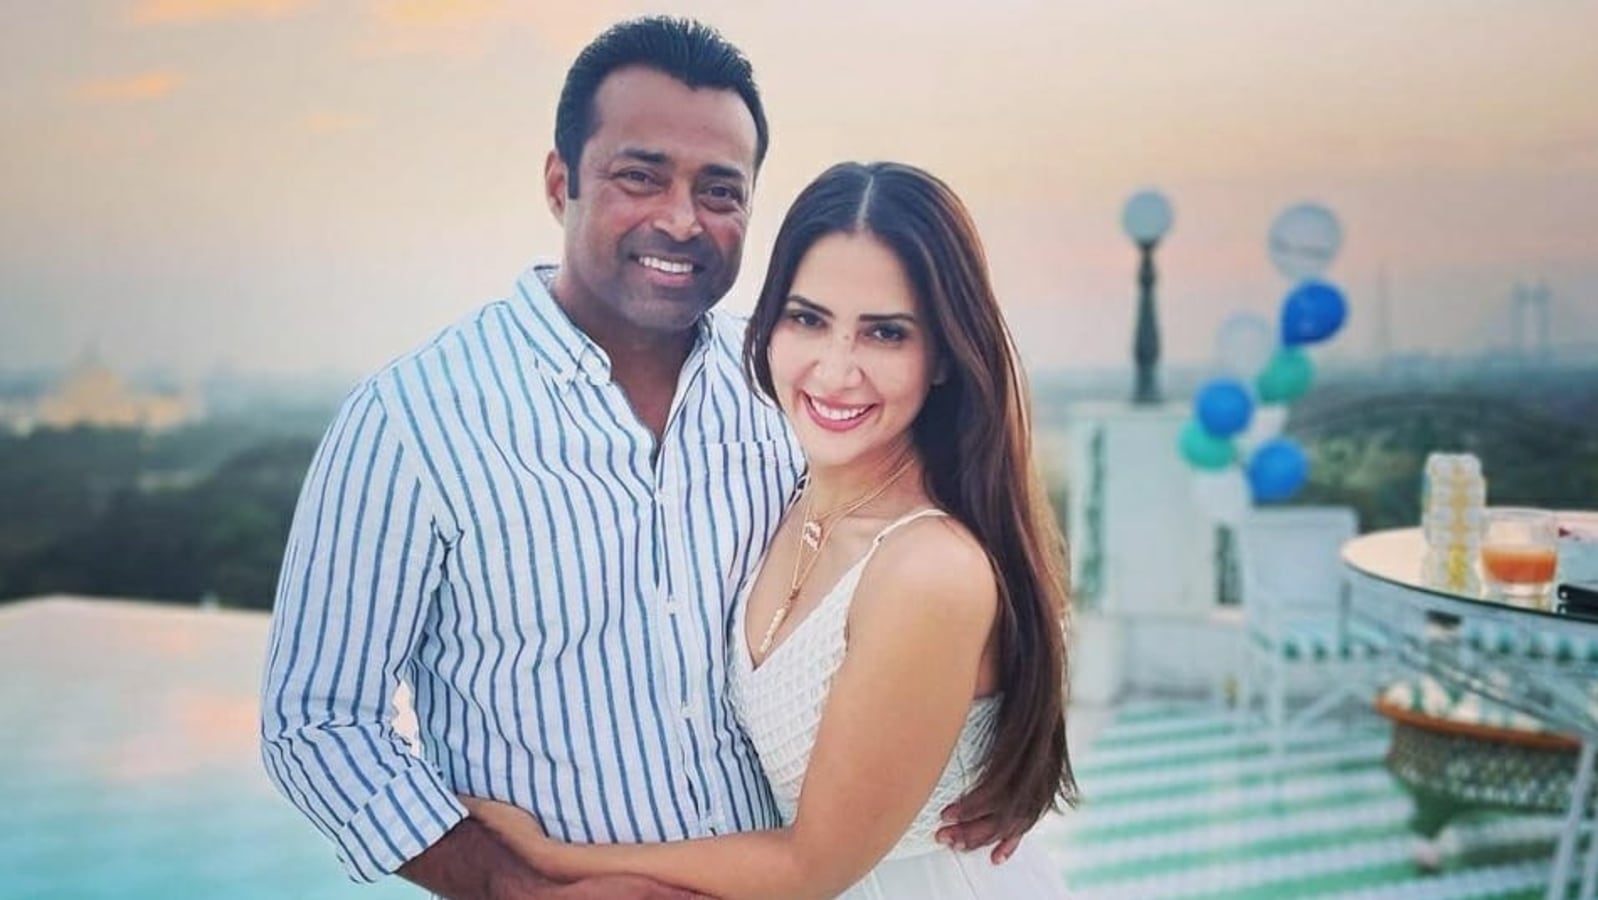 Kim Sharma celebrates one year anniversary with Leander Paes, shares sweet memories: ‘Thank you for being mine’